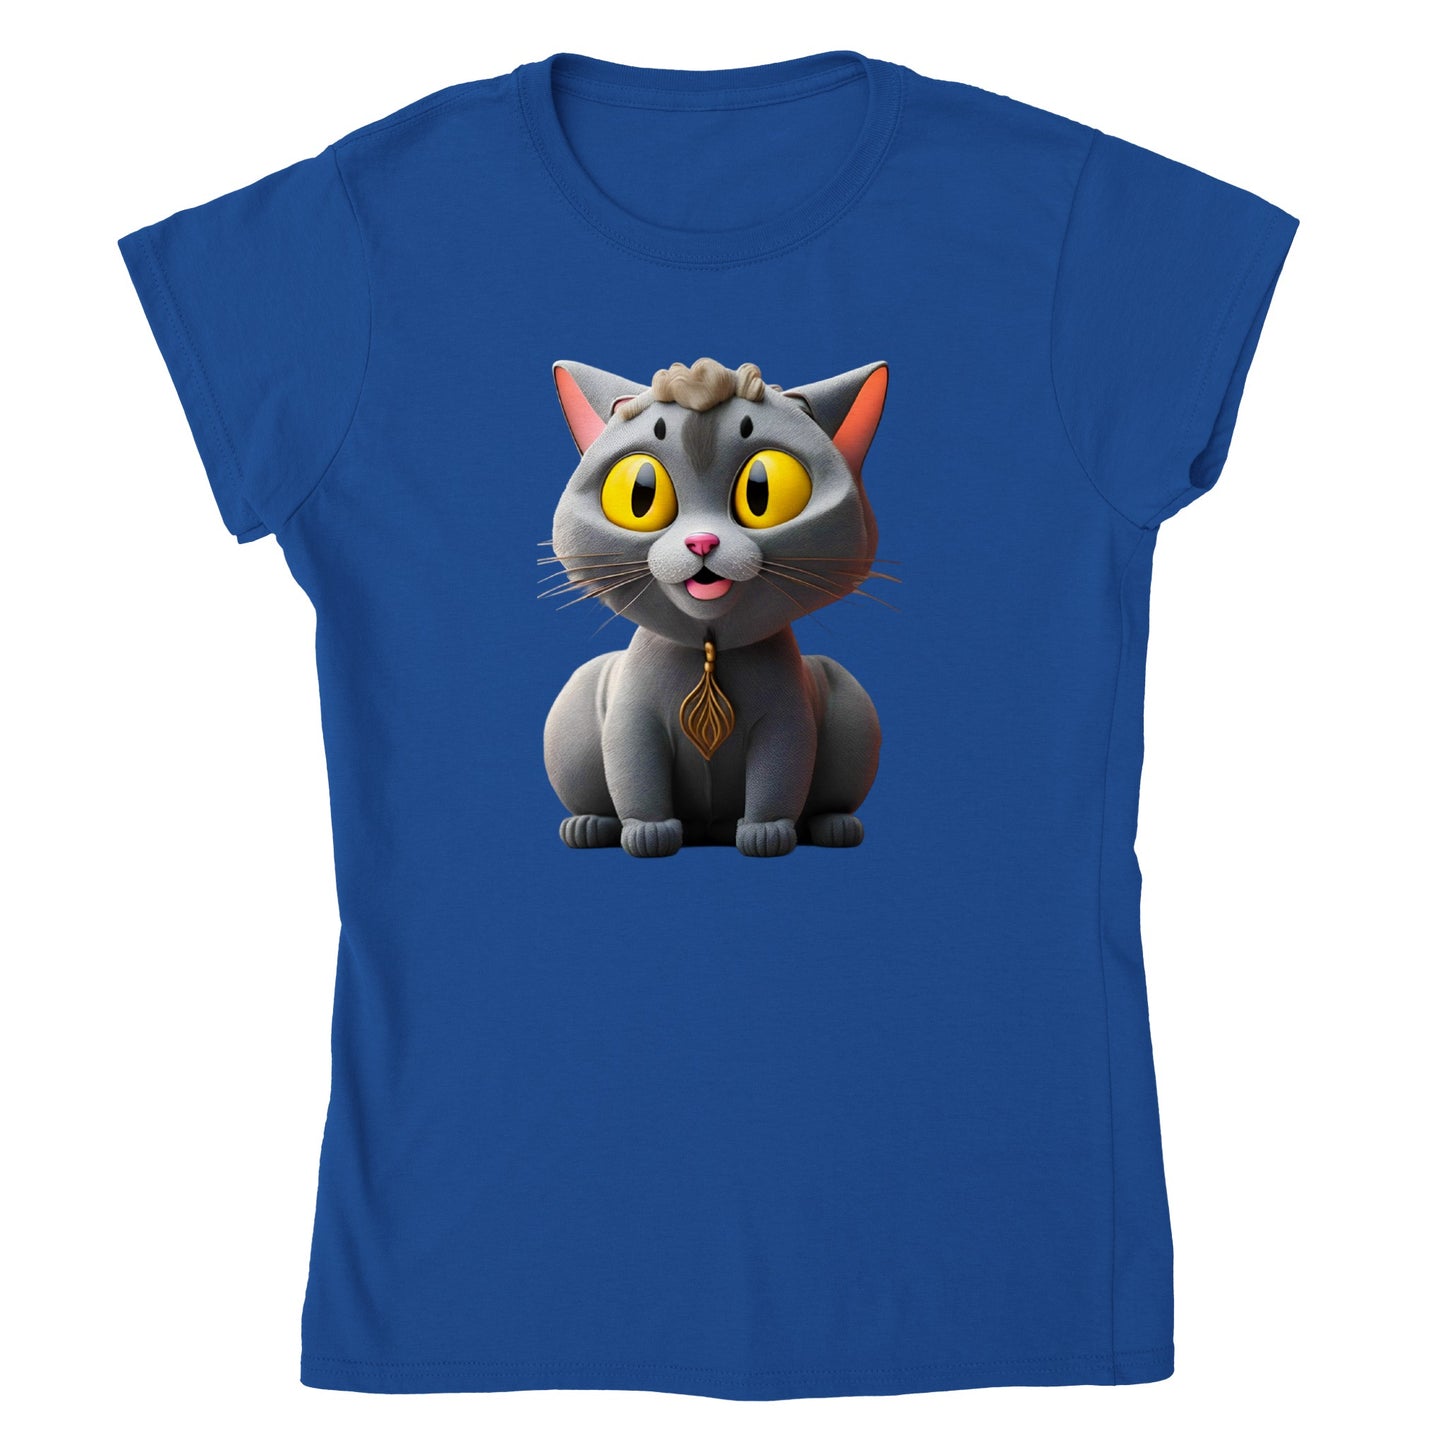 Adorable, Cool, Cute Cats and Kittens Toy - Classic Women’s Crewneck T-Shirt 51